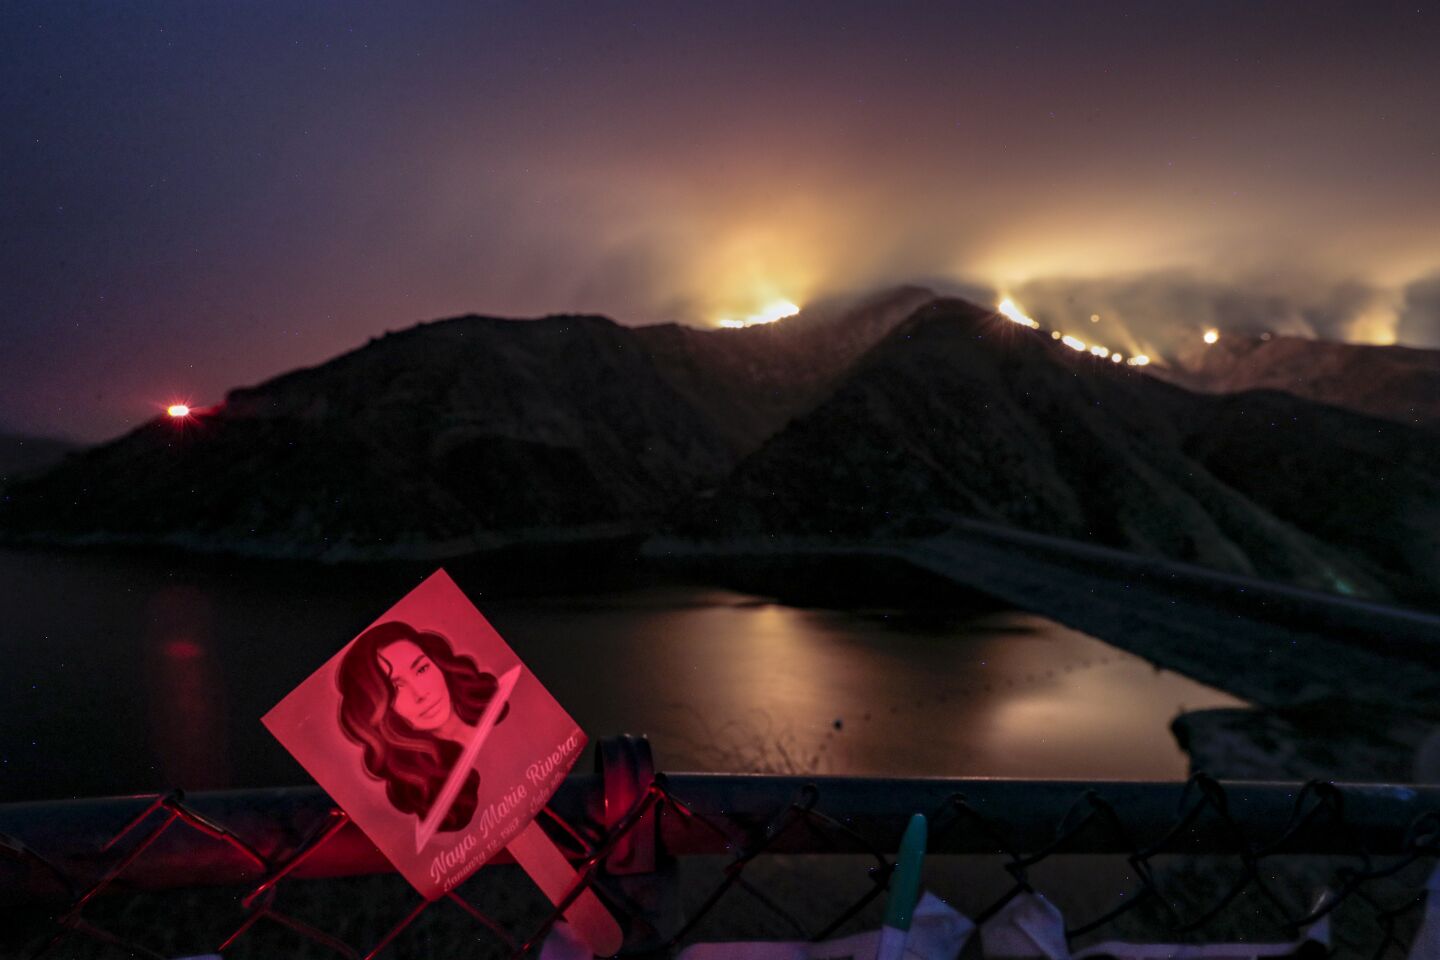 The Holser Fire burns through the night just east of Lake Piru, where actress Naya Rivera died in mid-July.